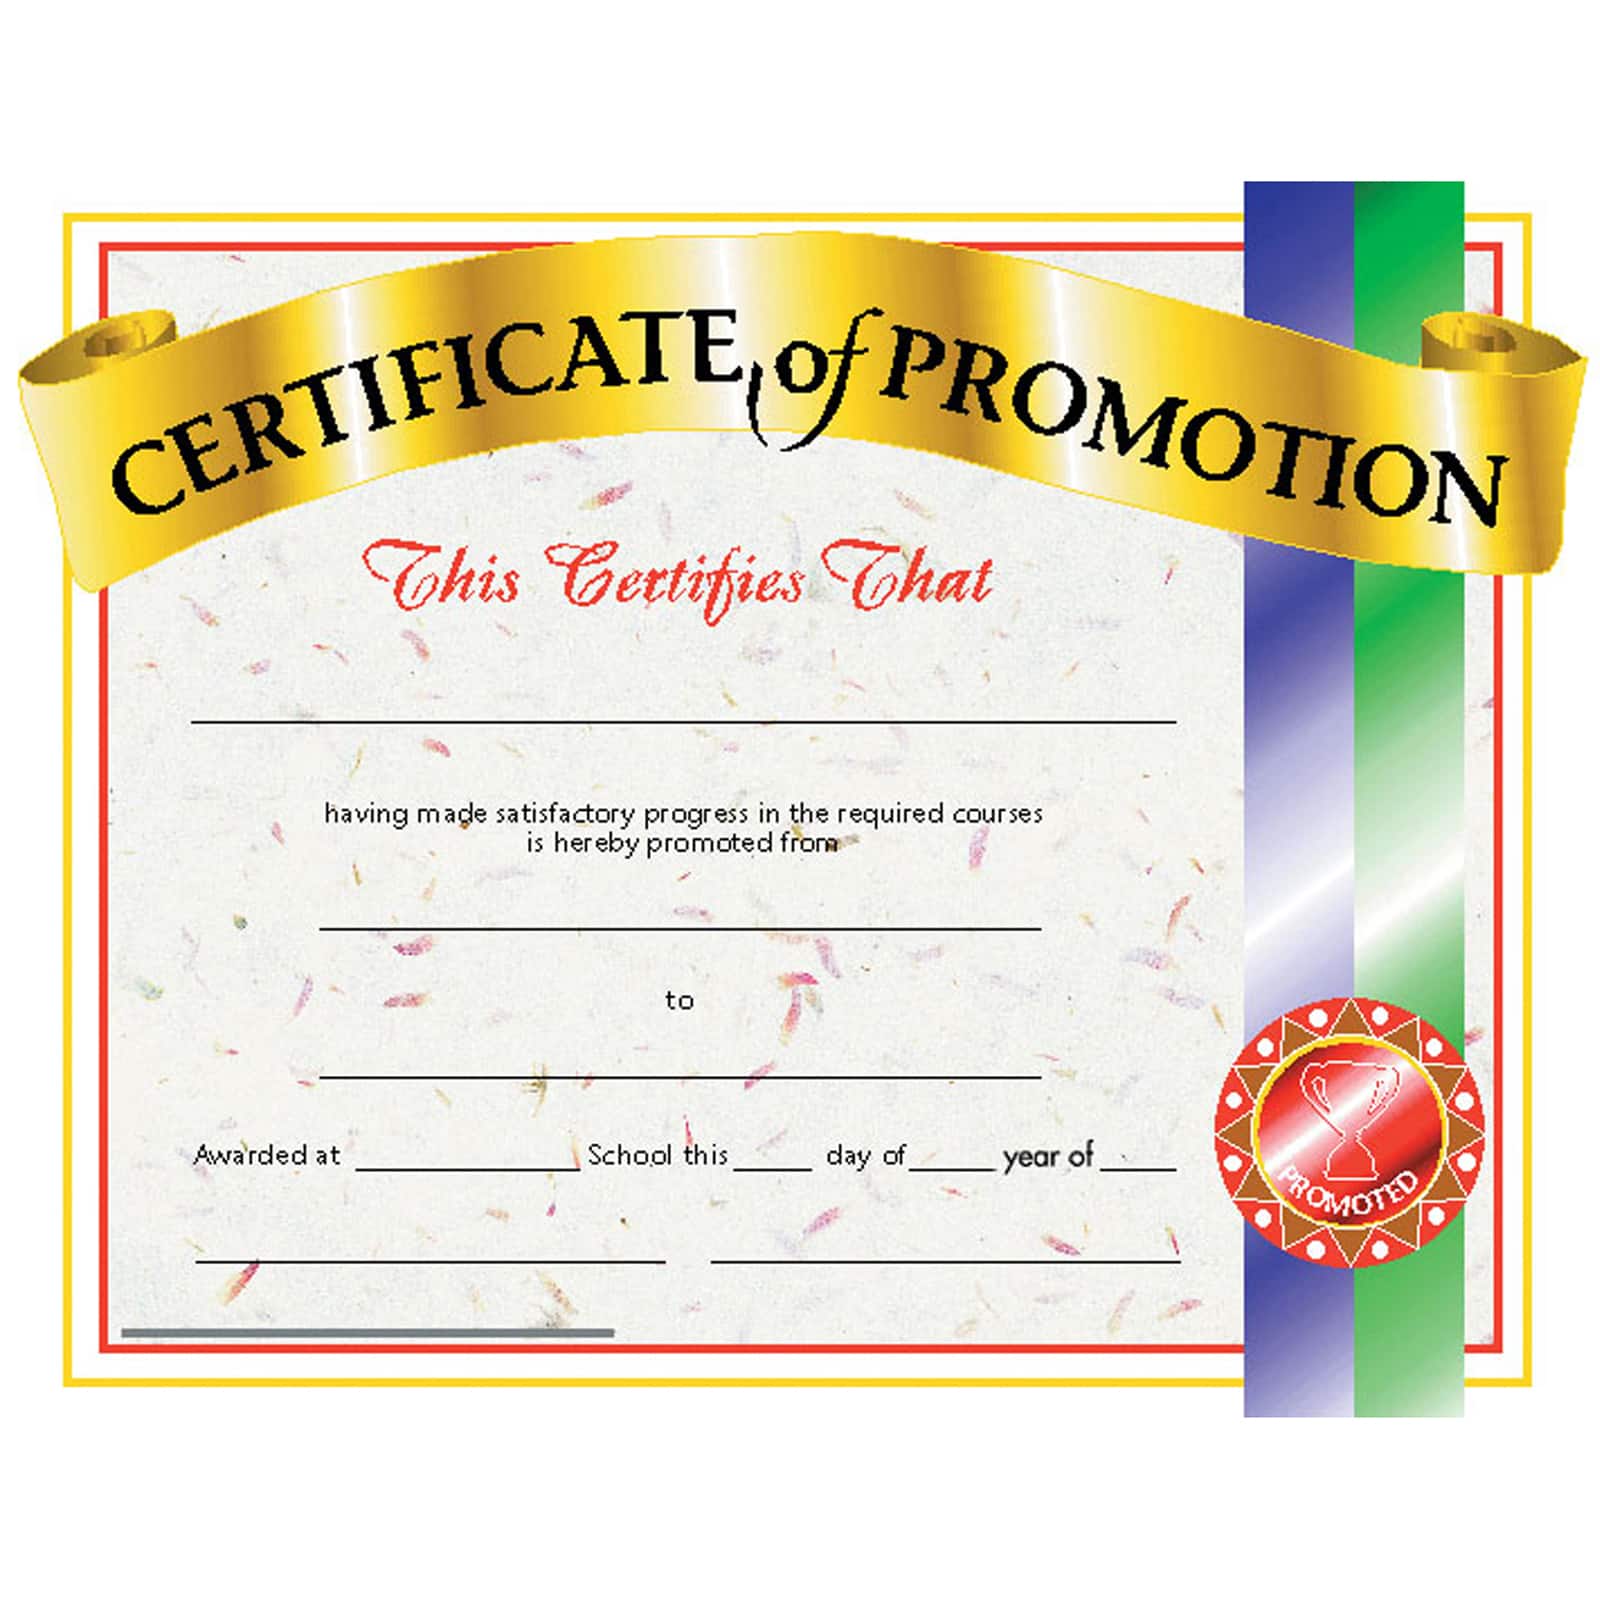 Thenshop 240 Sheets Blank Certificate Paper 8.5 x 11 for Printing with Gold  Foil Border Award Certificates of Achievement for Graduation Diploma Paper